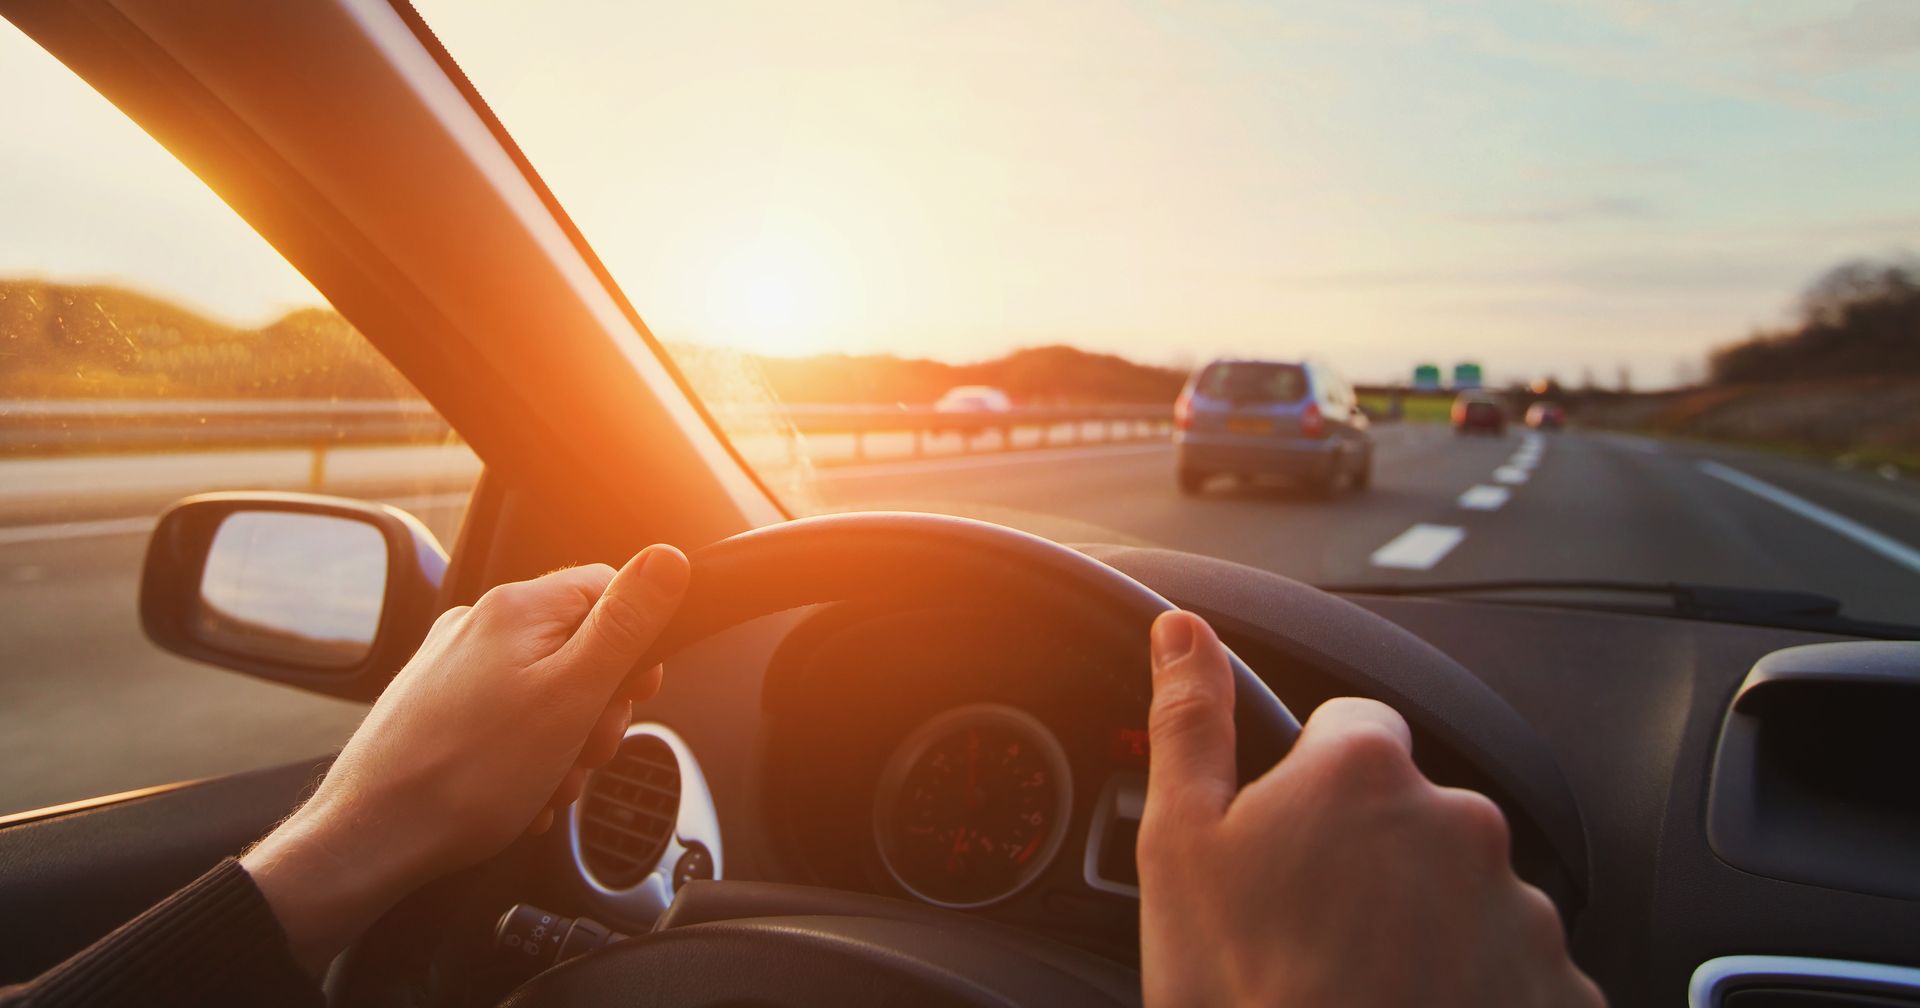 A person is driving a car on a highway at sunset | Pitts Automotive, Inc